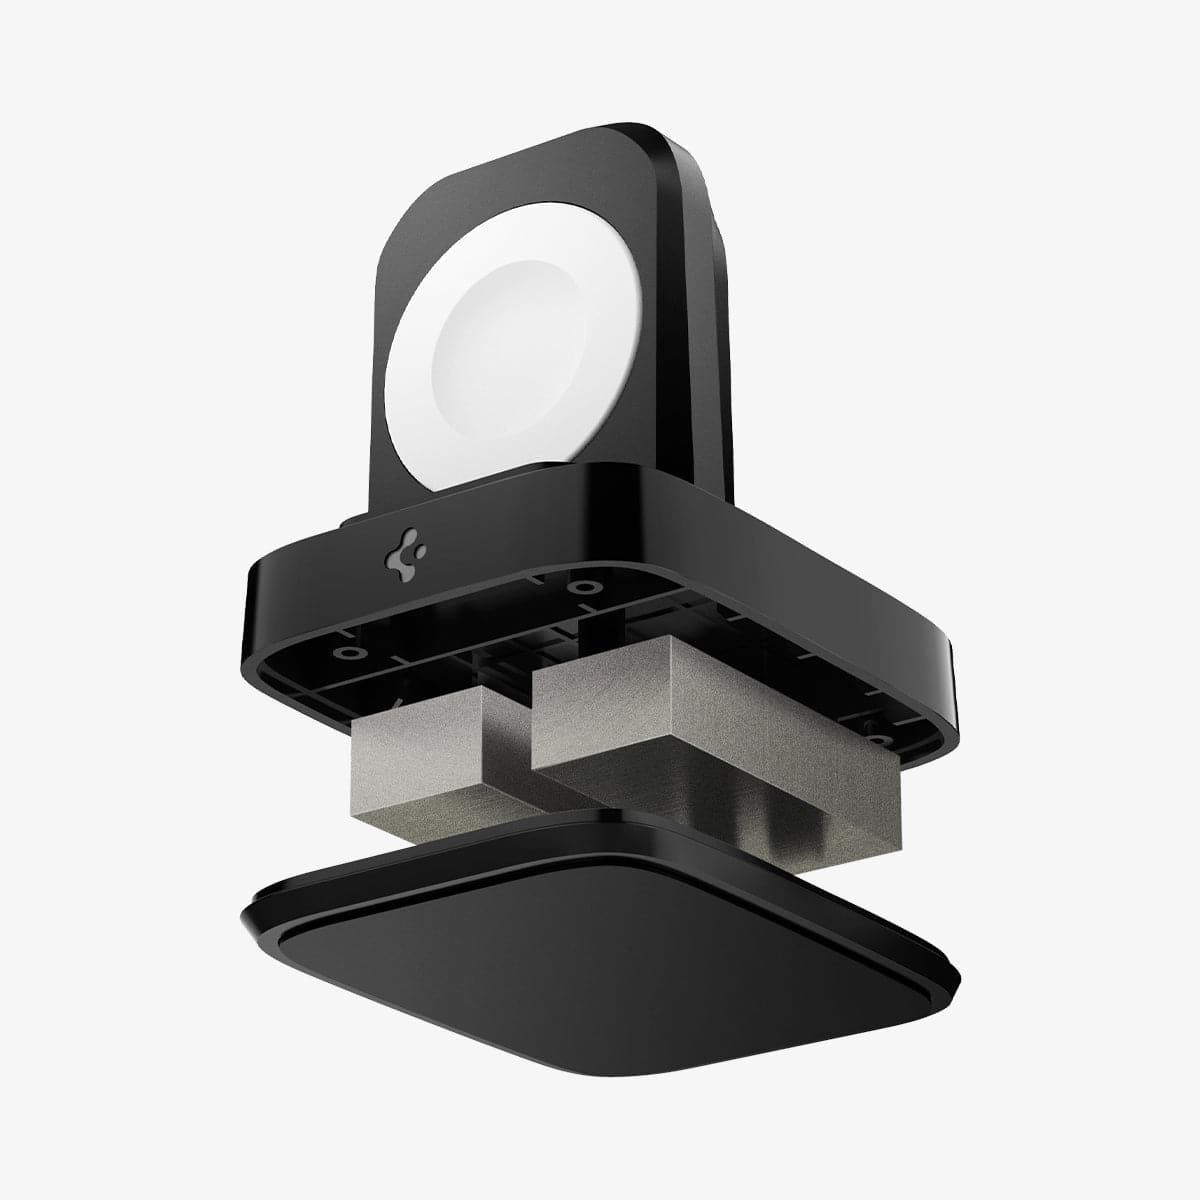 000CH25522 - Apple Watch ArcField™ Wireless Charger PF2002 in black showing the front and multiple components of stand